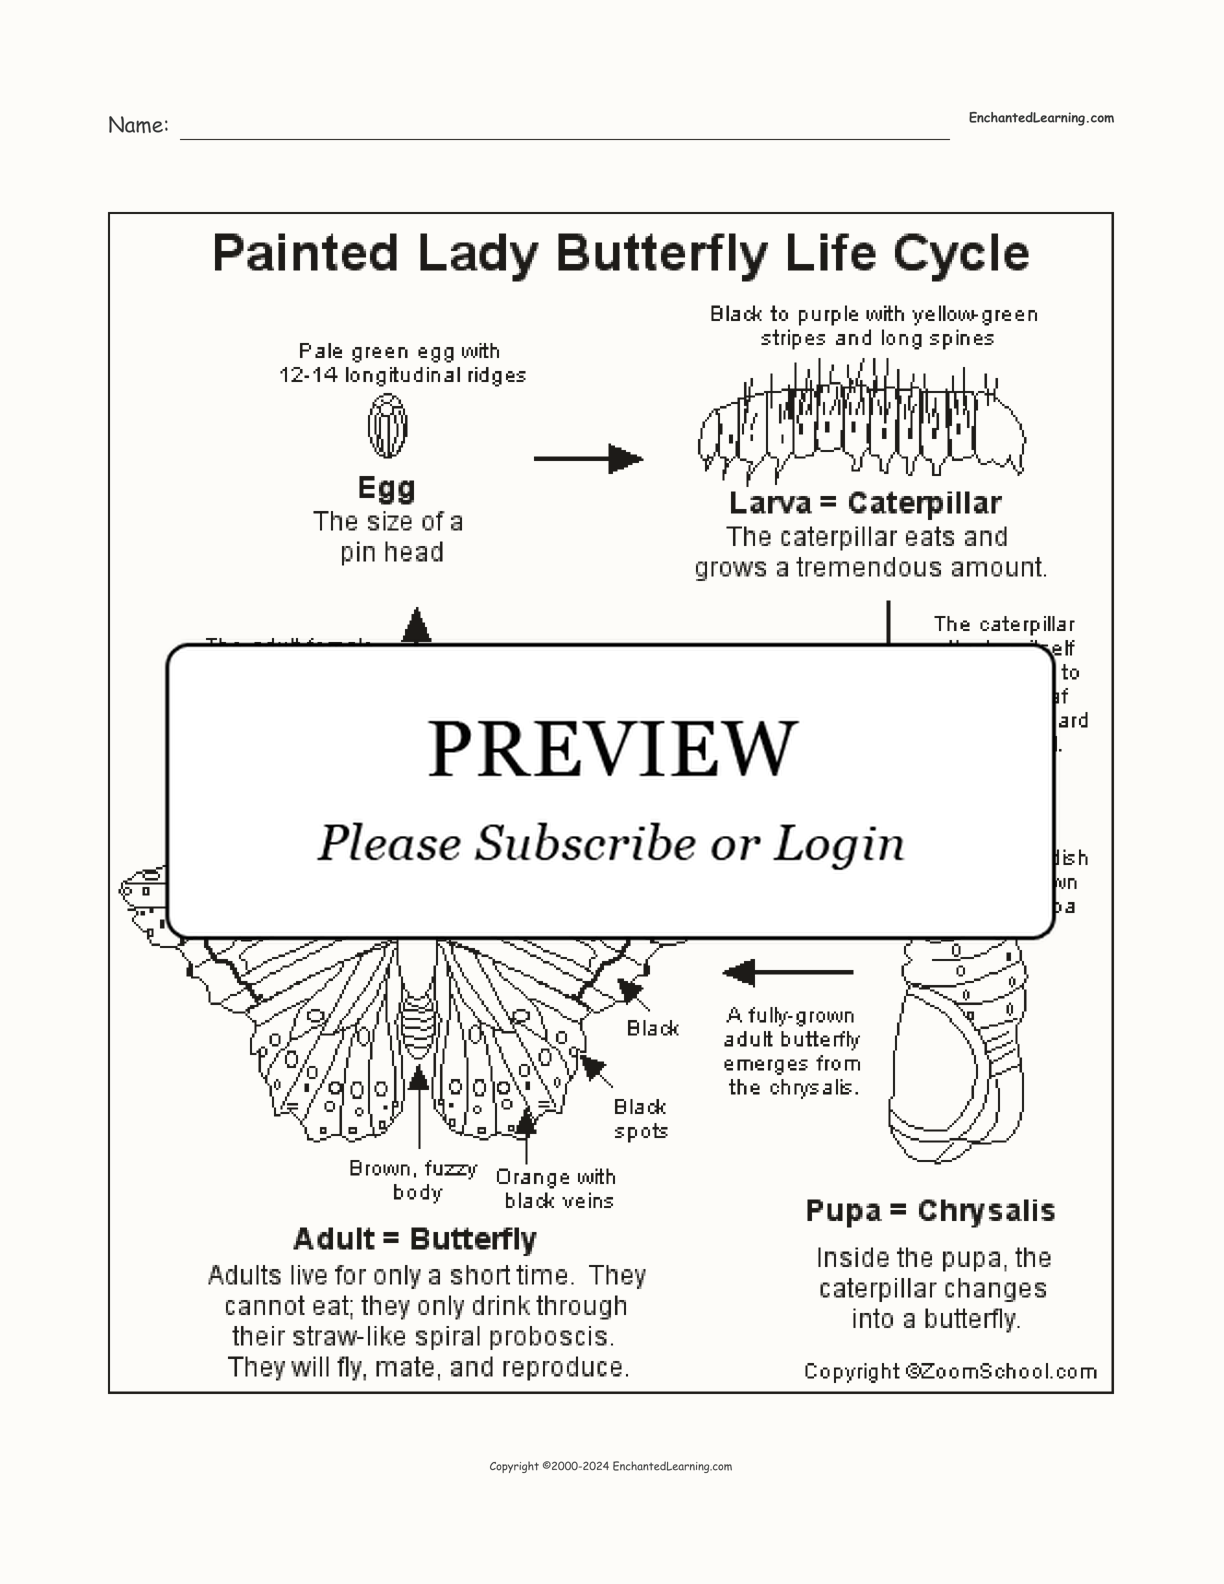 Painted Lady Butterfly Lifecycle interactive printout page 1